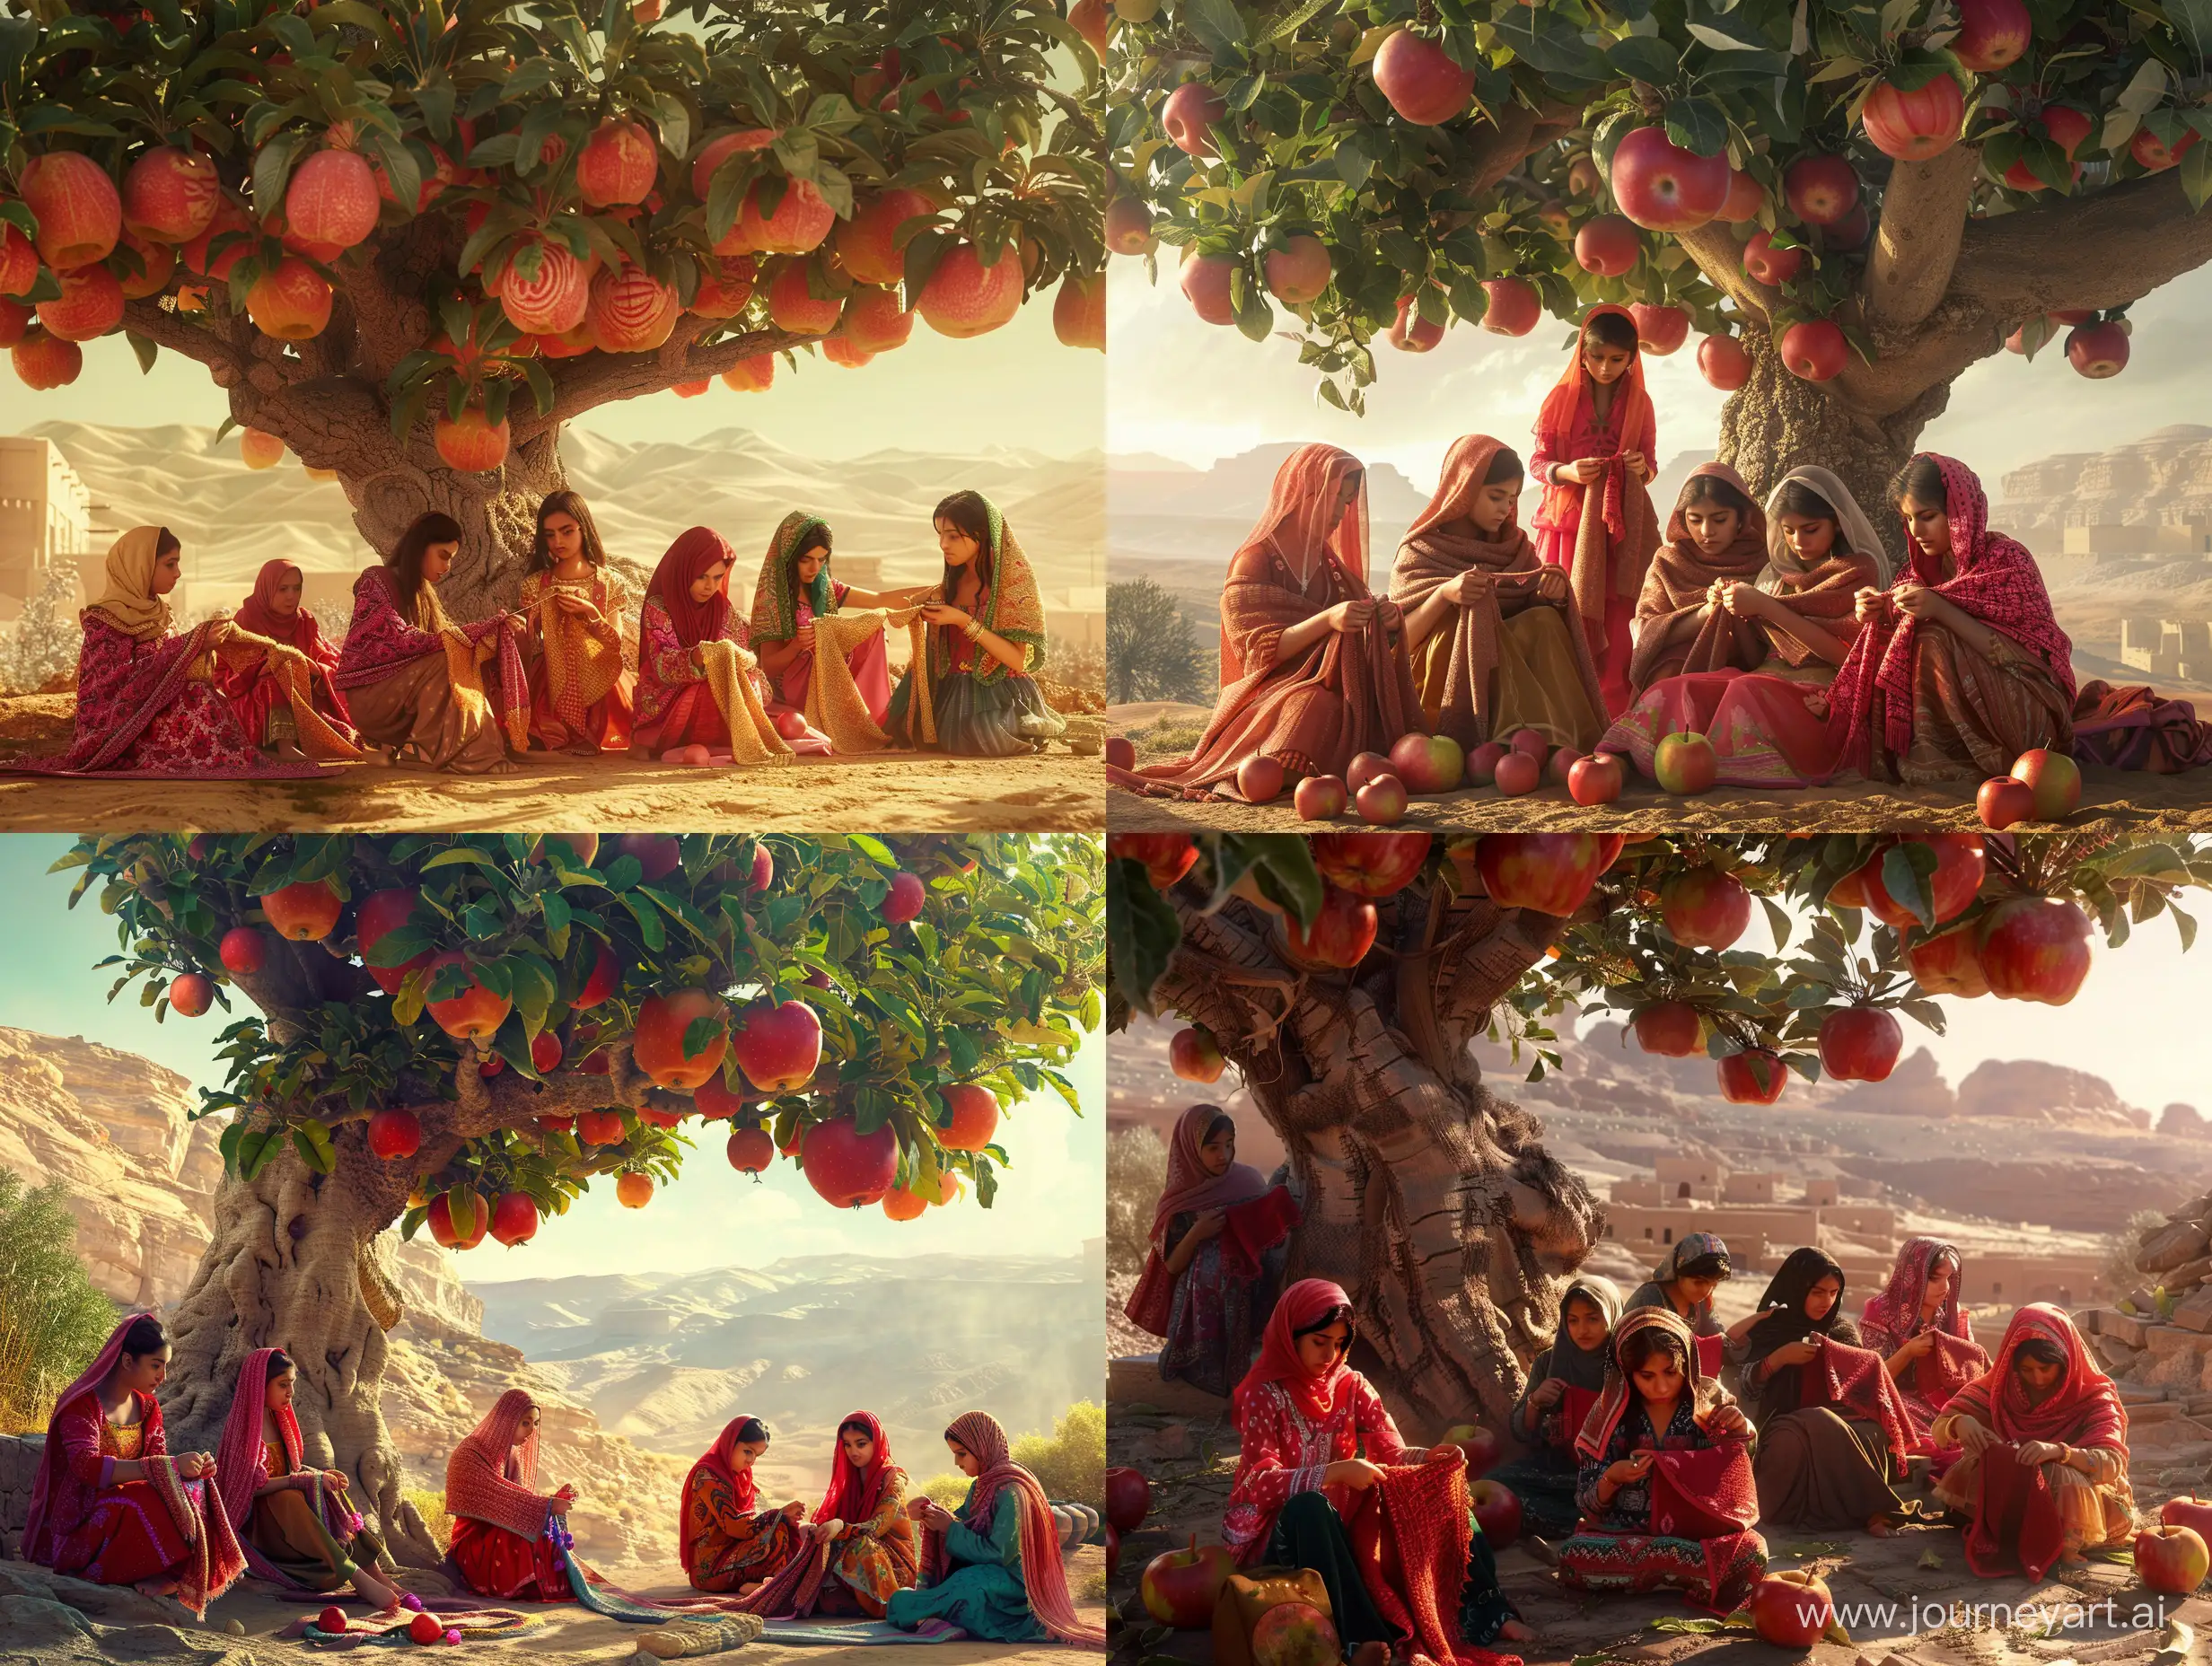 Beautiful Persian women and girls are knitting shawls under a giant apple tree with watermelon-sized apples, they are out of town. in a desert, in an ancient civilization, cinematic, epic realism,8K, highly detailed, long shot technique, backlit 